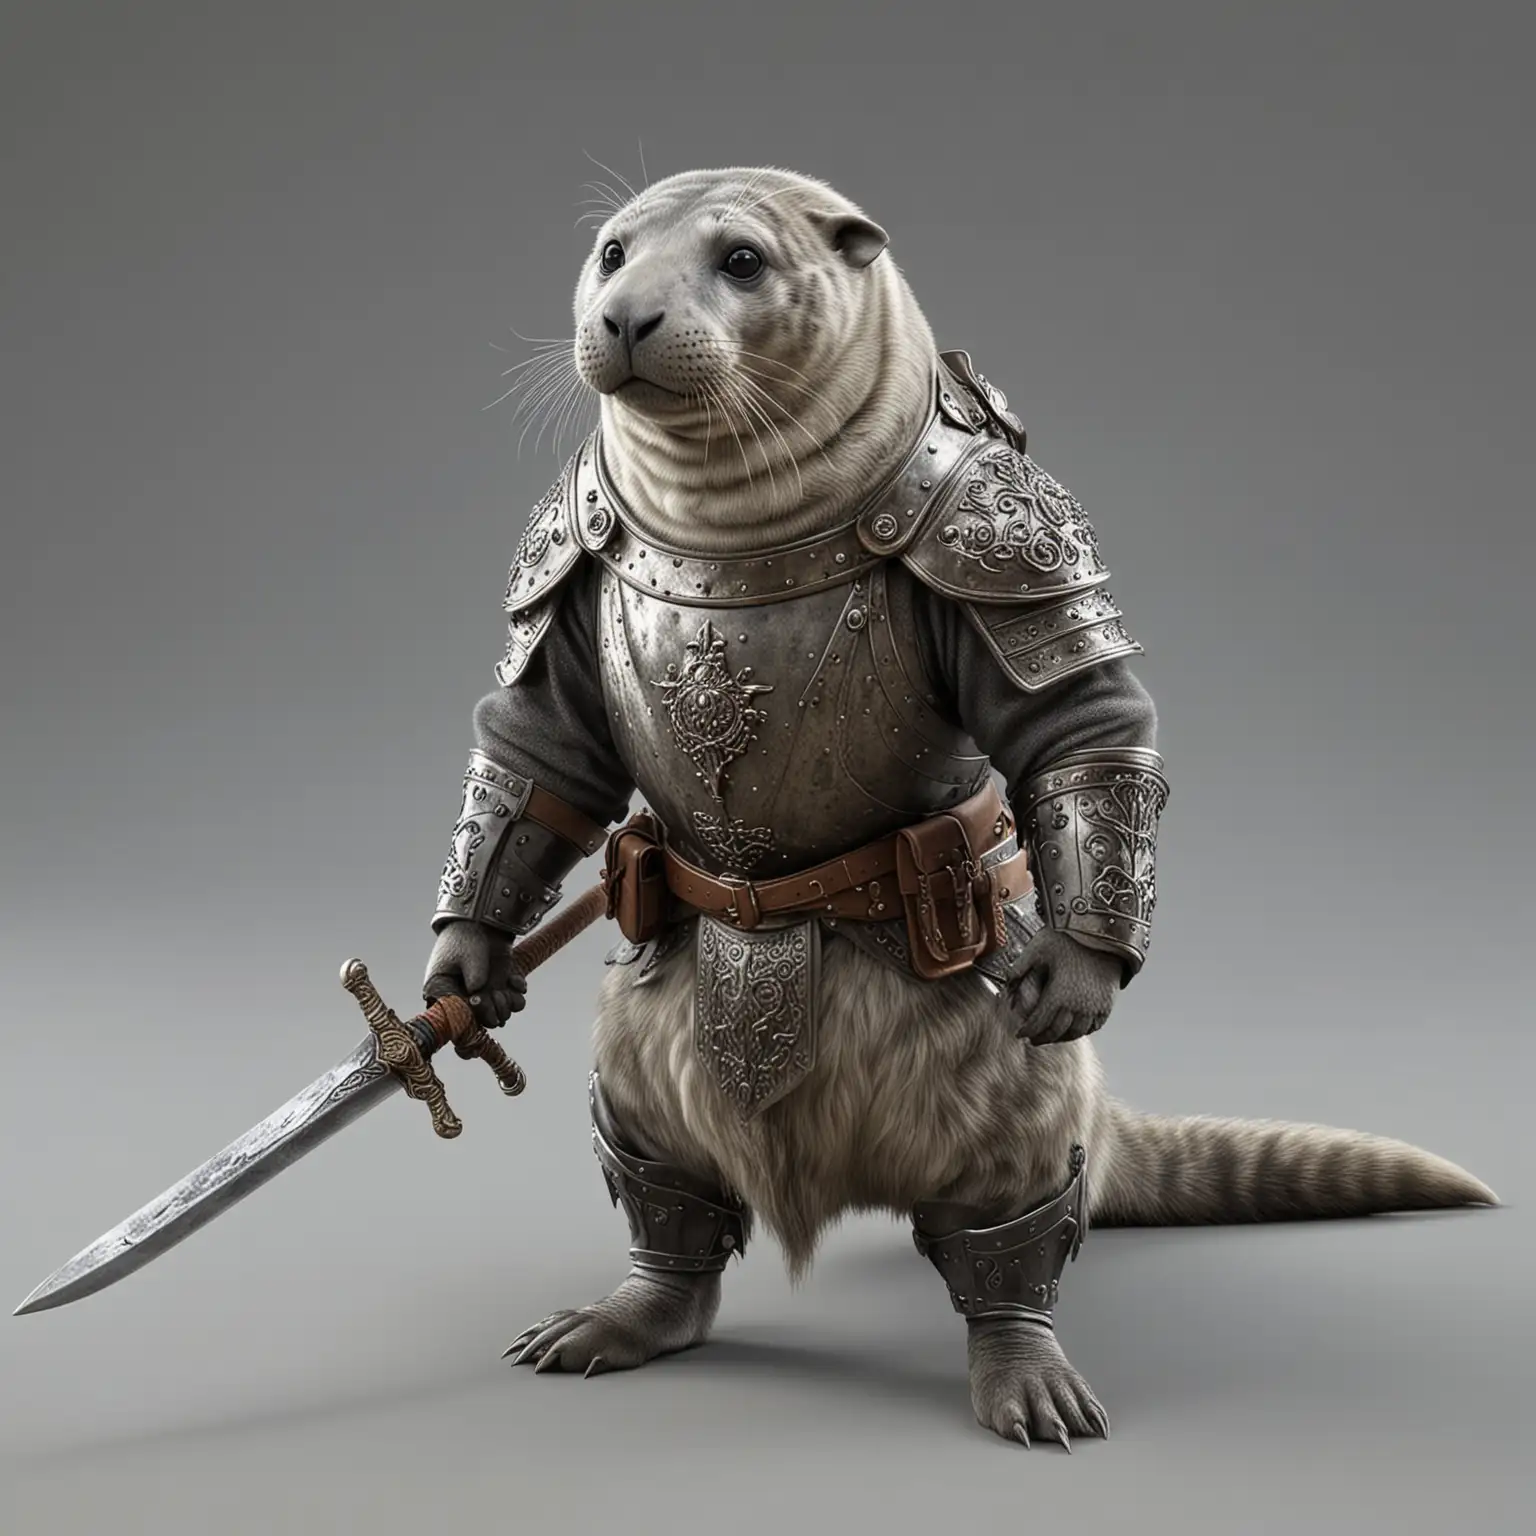 Realistic Grey Seal Soldier in Medieval Armor Holding Sword